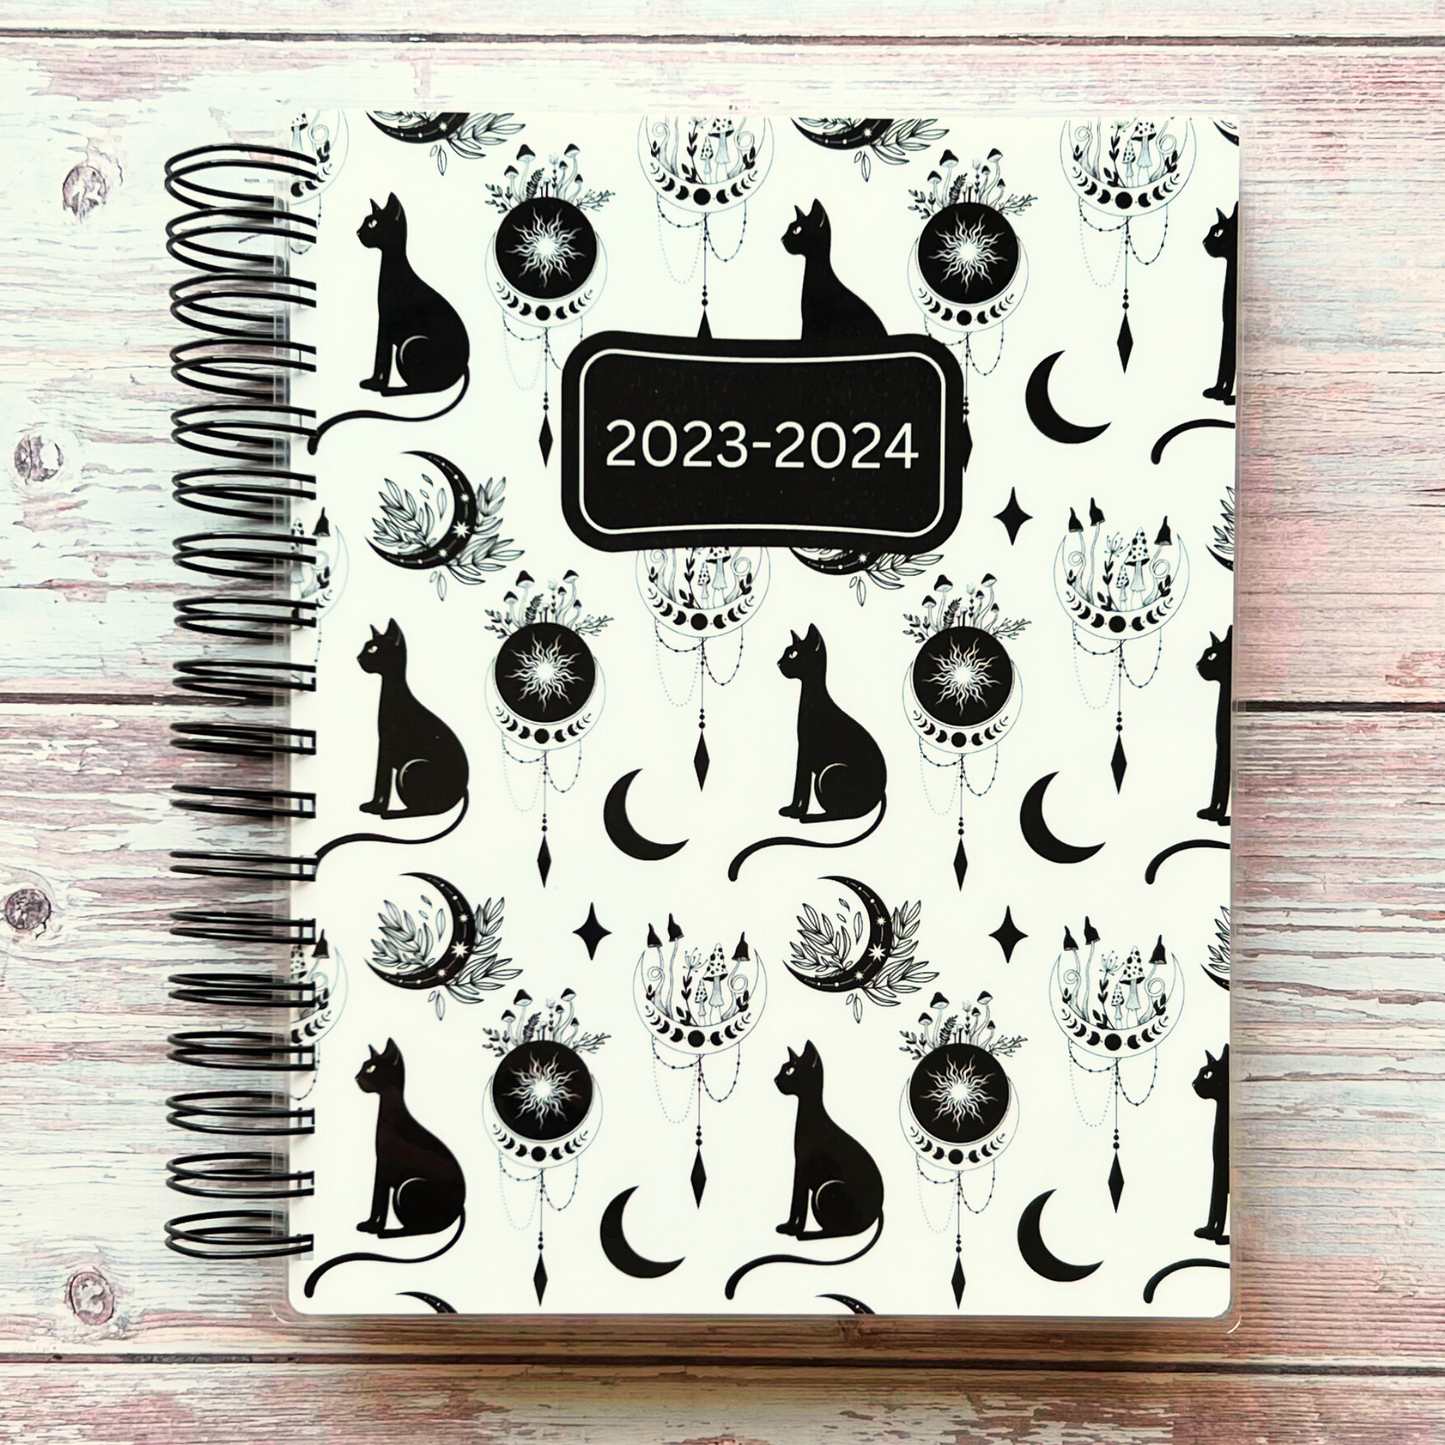 Personalized Weekly Planner 2023-2024 | Celestial Black Cats Weekly Planners Artful Planner Co. 